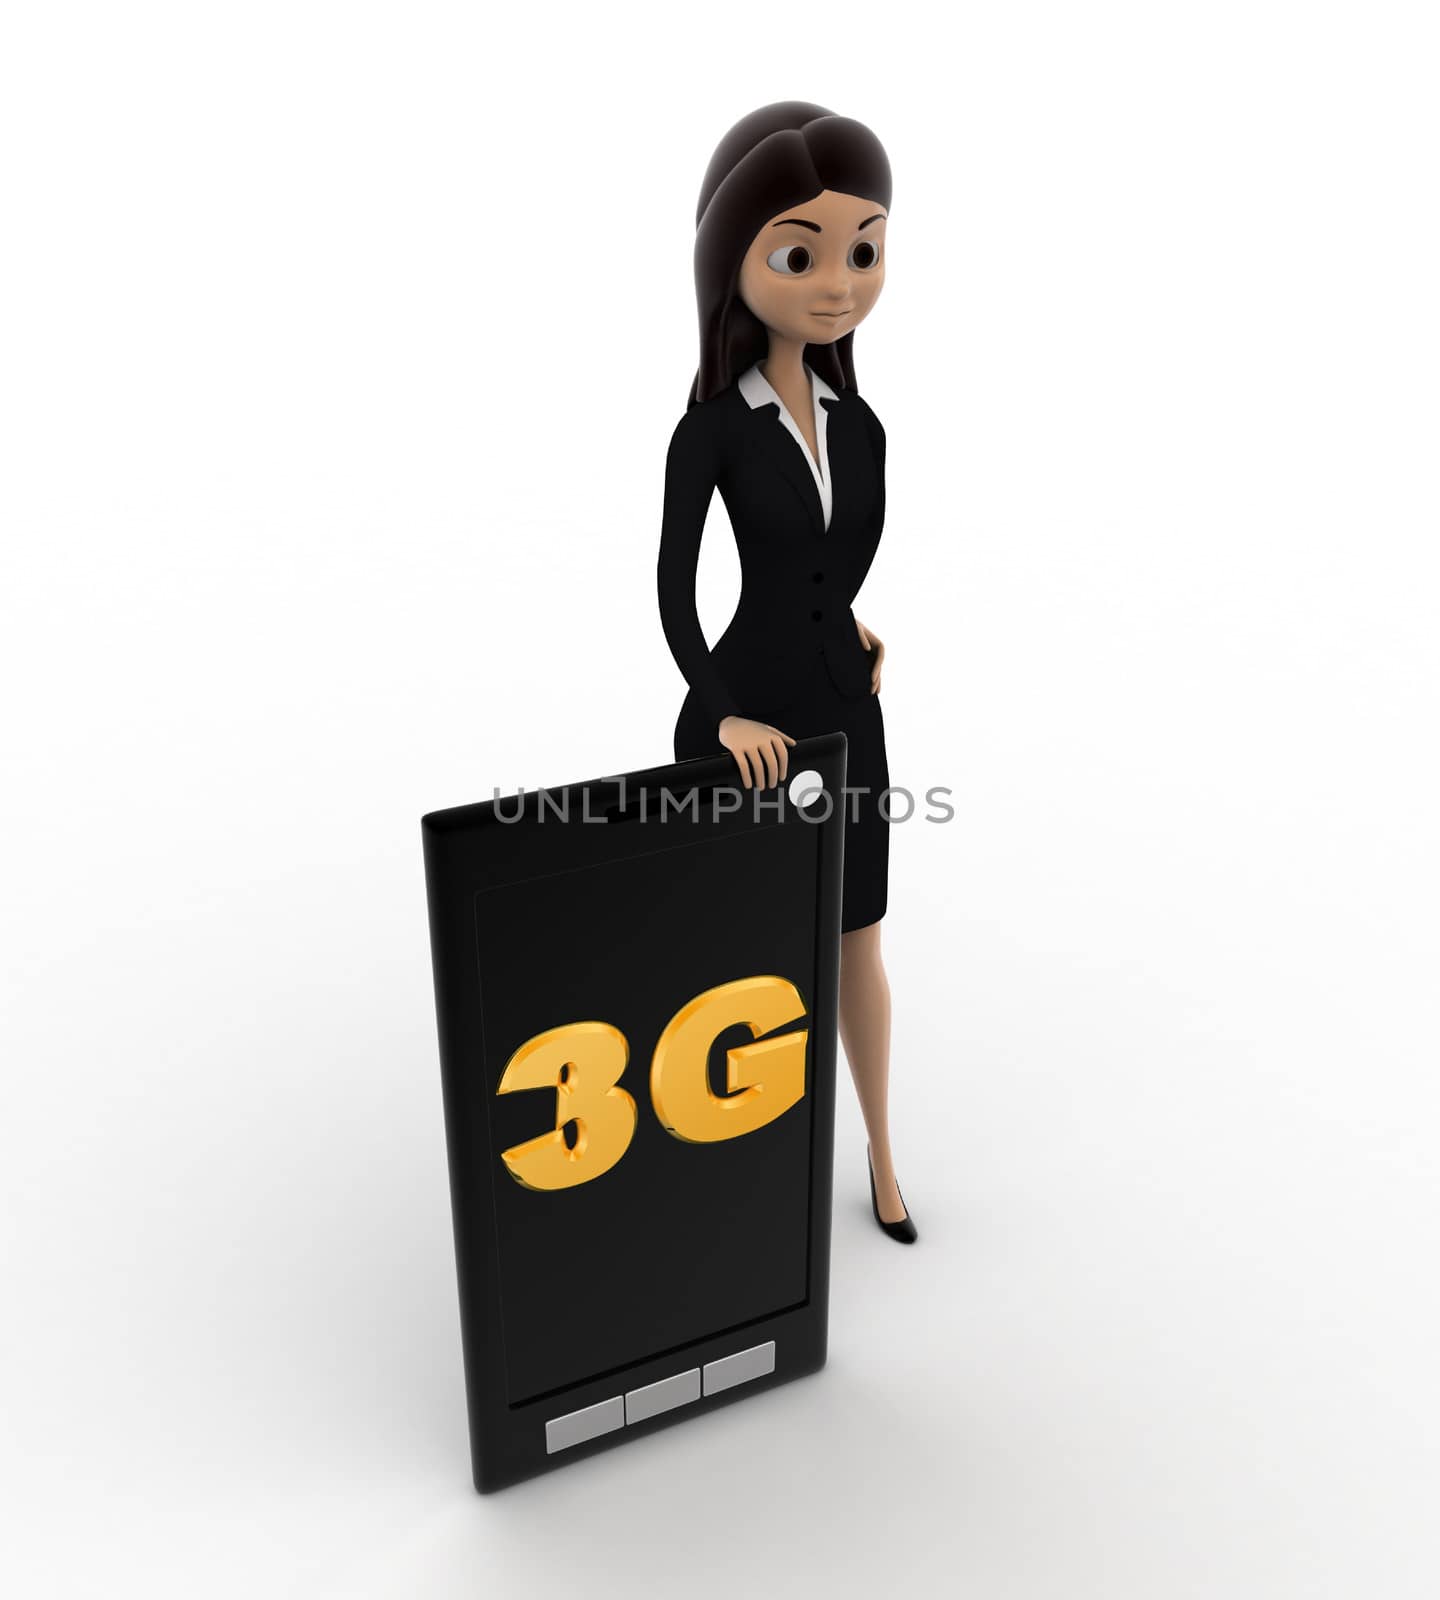 3d woman with 3g enbaled smartphone concept on white bakcground, top angle view